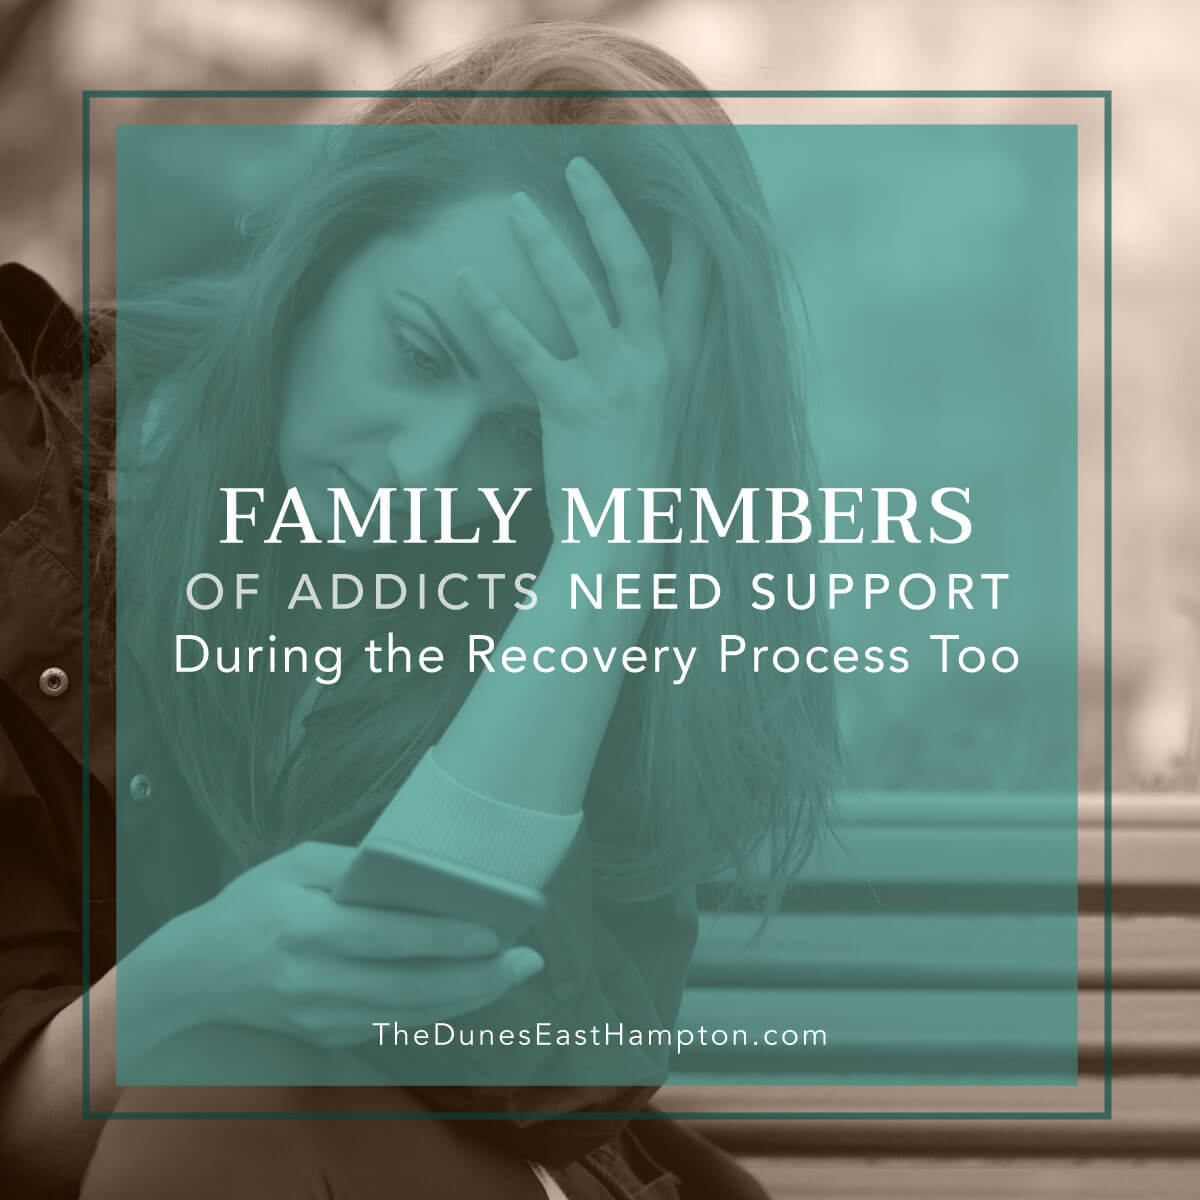 Family Members Of Addicts Need Support During Recovery Process - The Dunes East Hampton